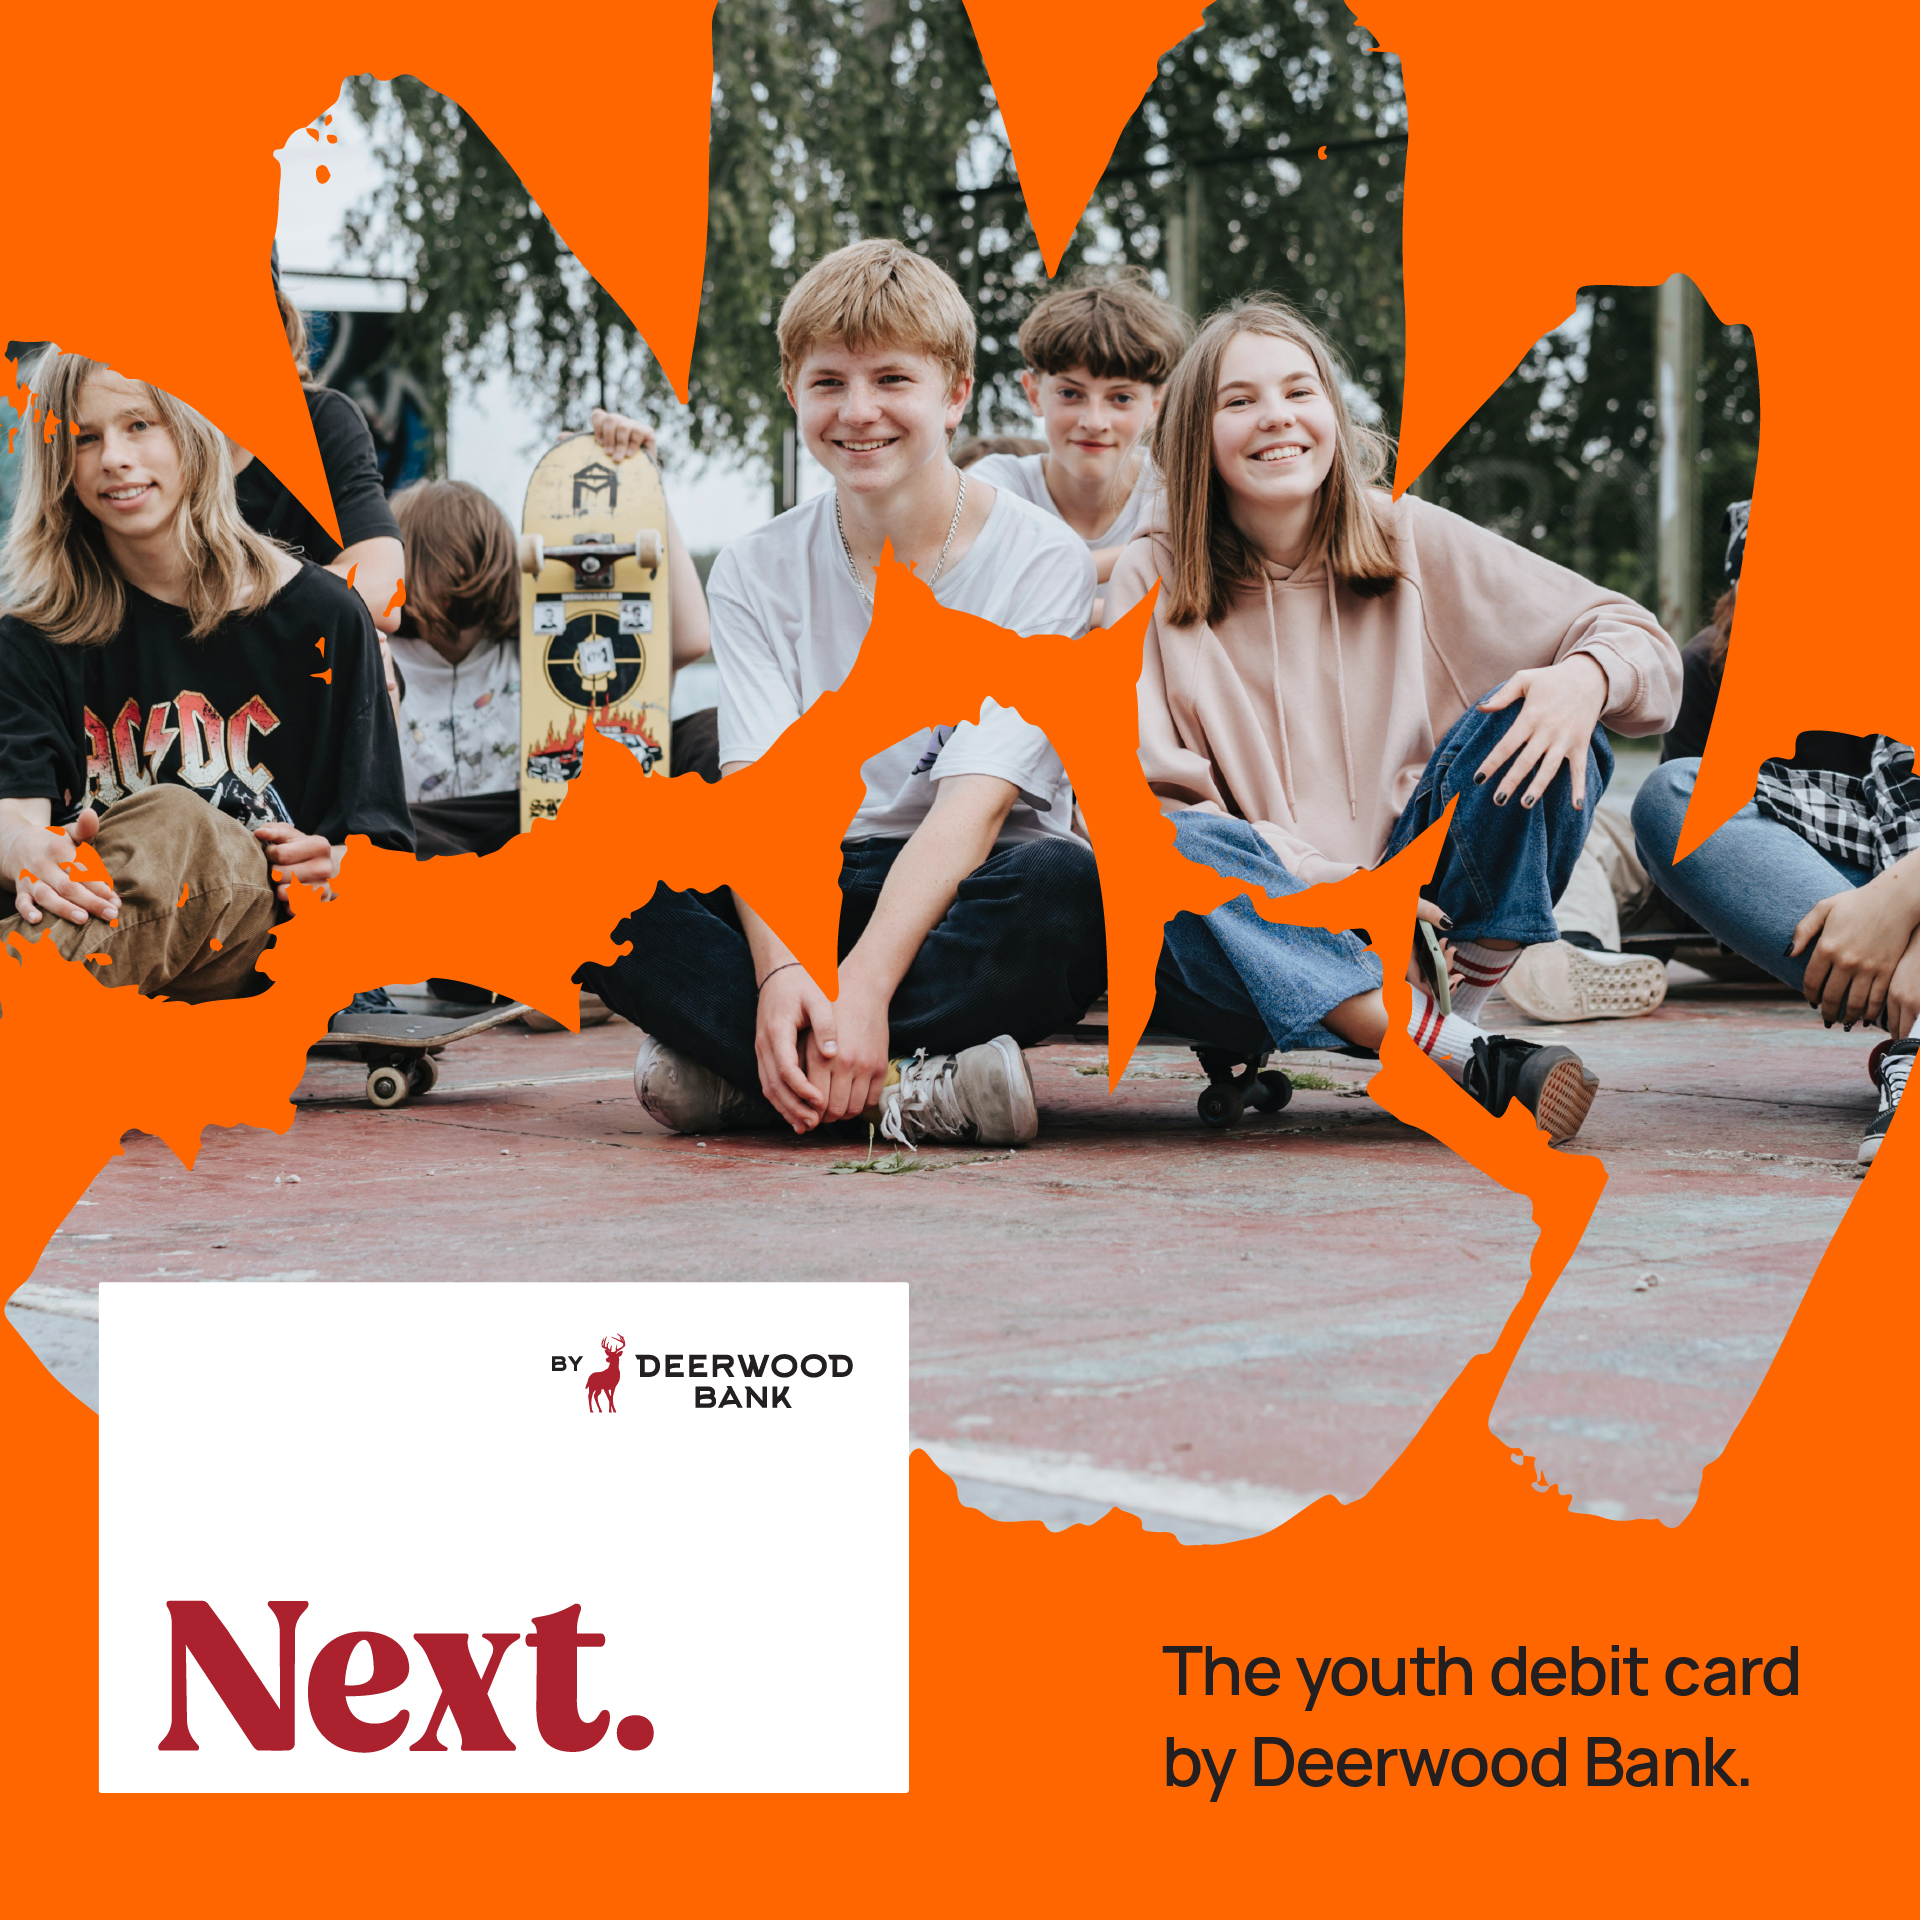 Next the youth debit card by Deerwood Bank